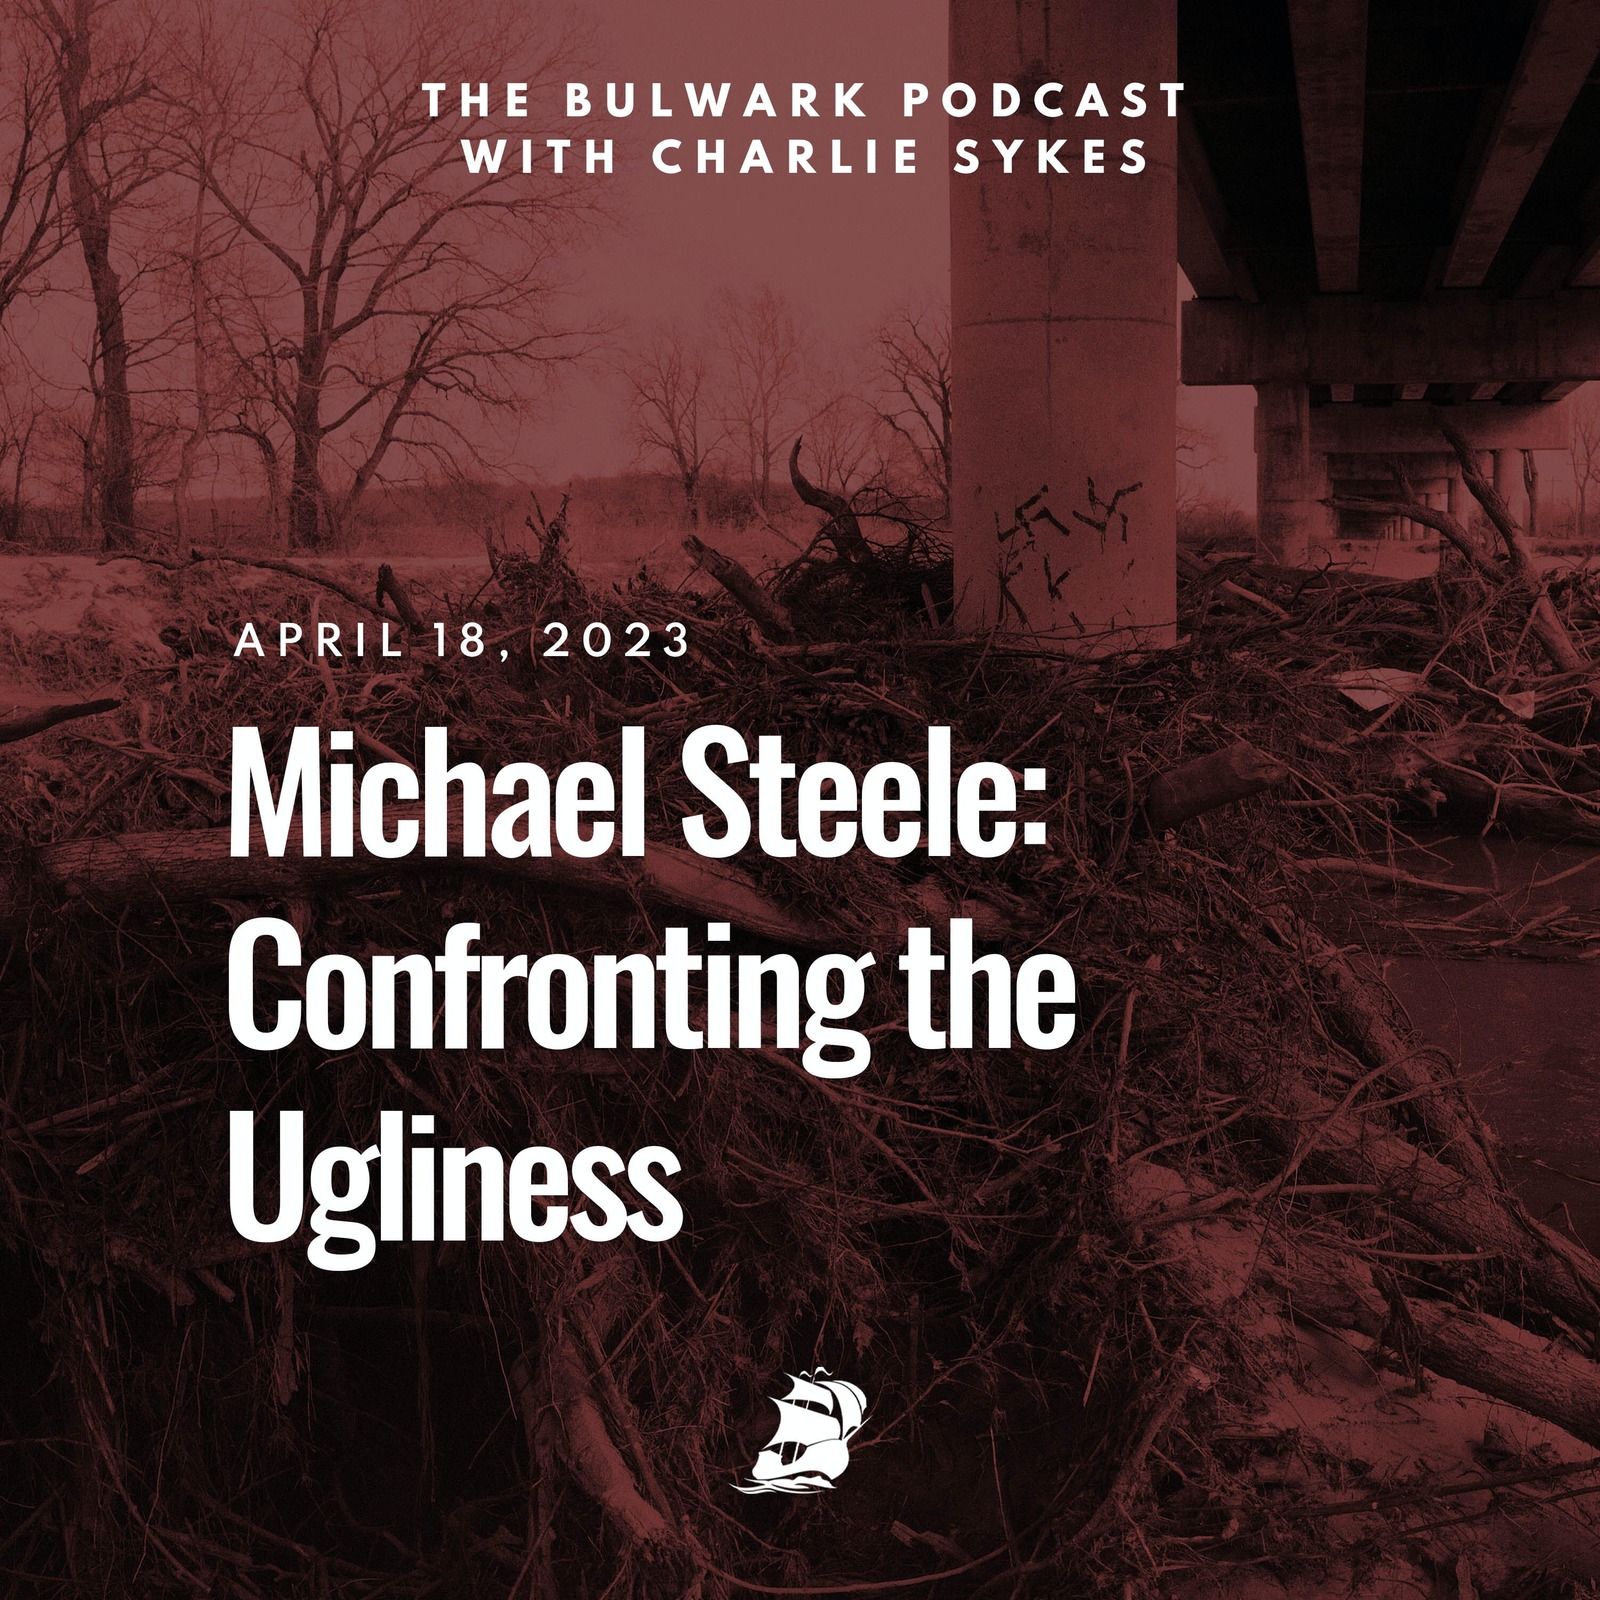 Michael Steele: Confronting the Ugliness